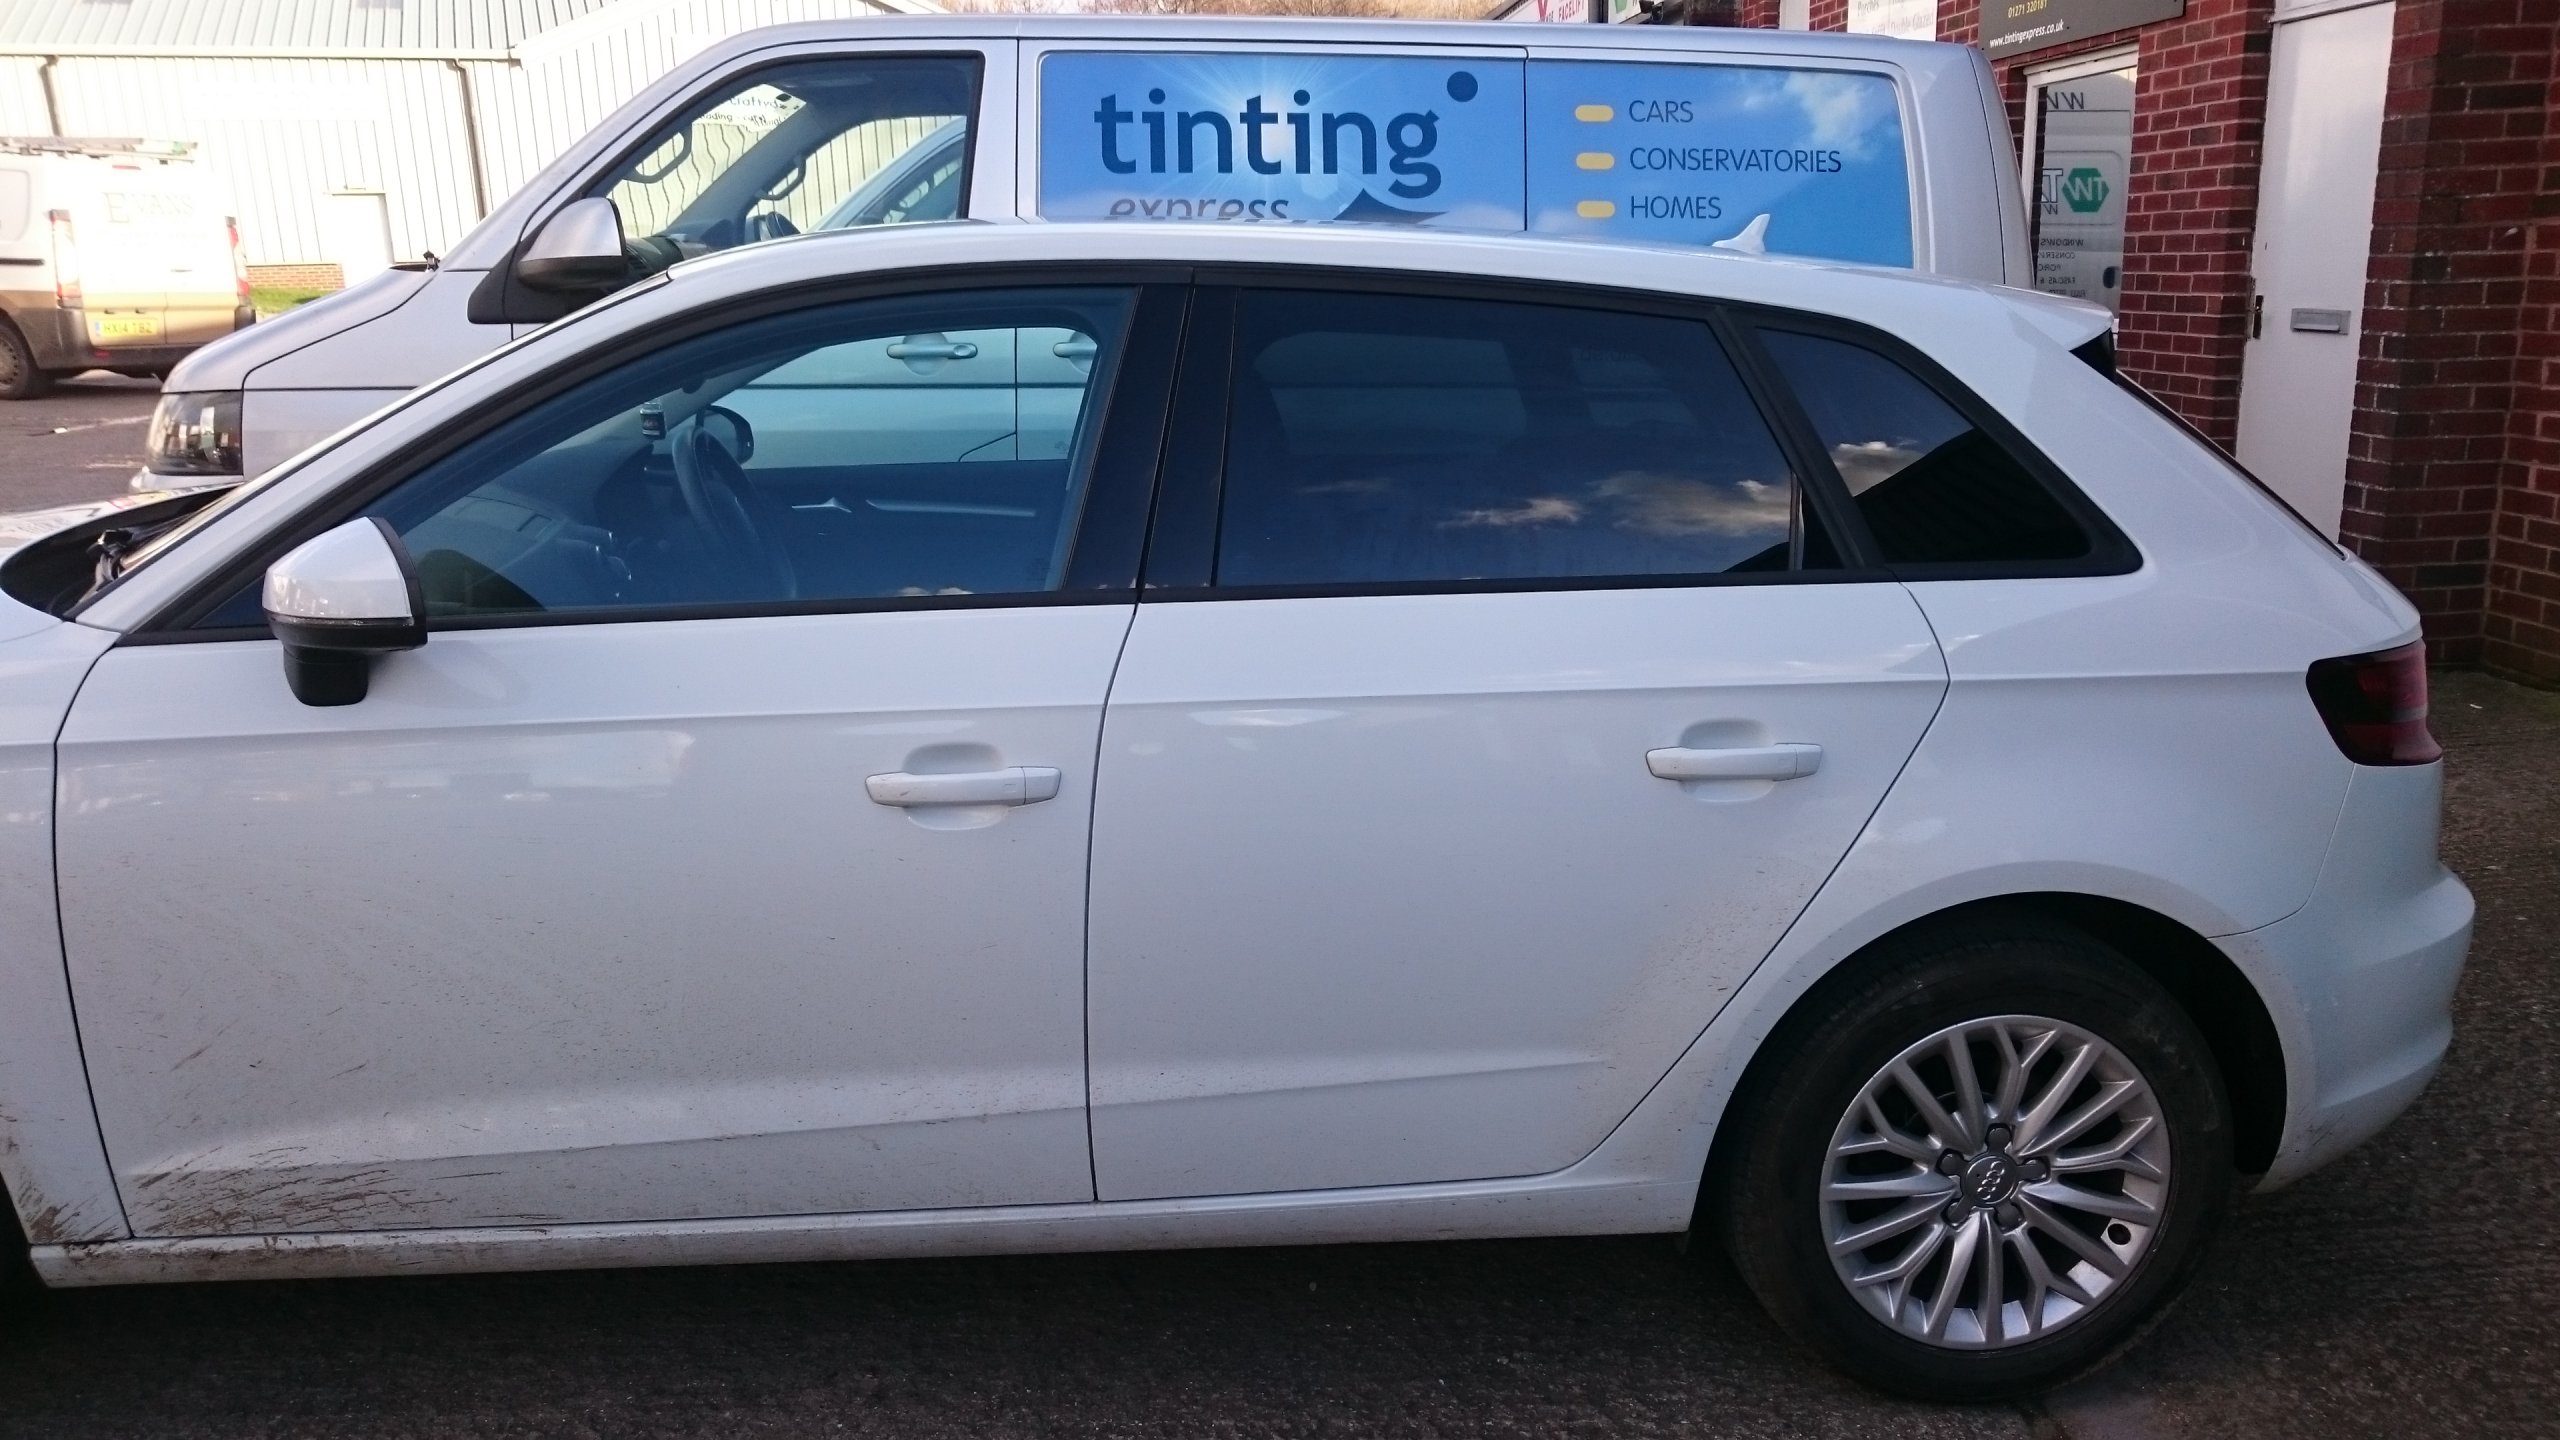 Audi A3 five door hatchback tinted with Llumar ATC 20 automotive window film. Tinting Express Barnstaple's number one window tinting company